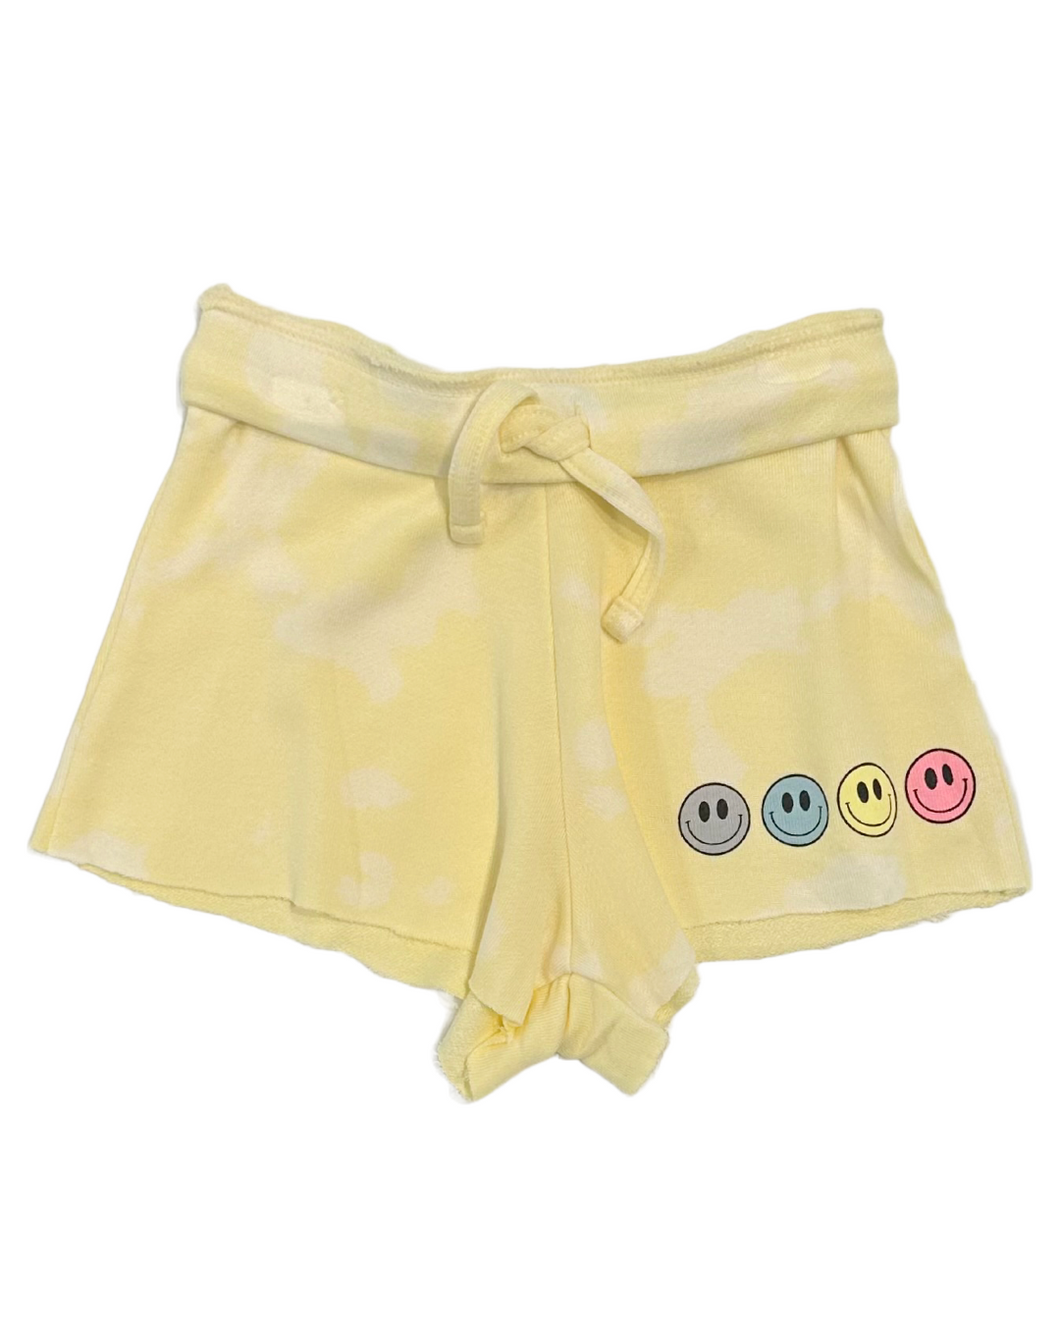 Yellow Tie Dye Smiley Face Shorts